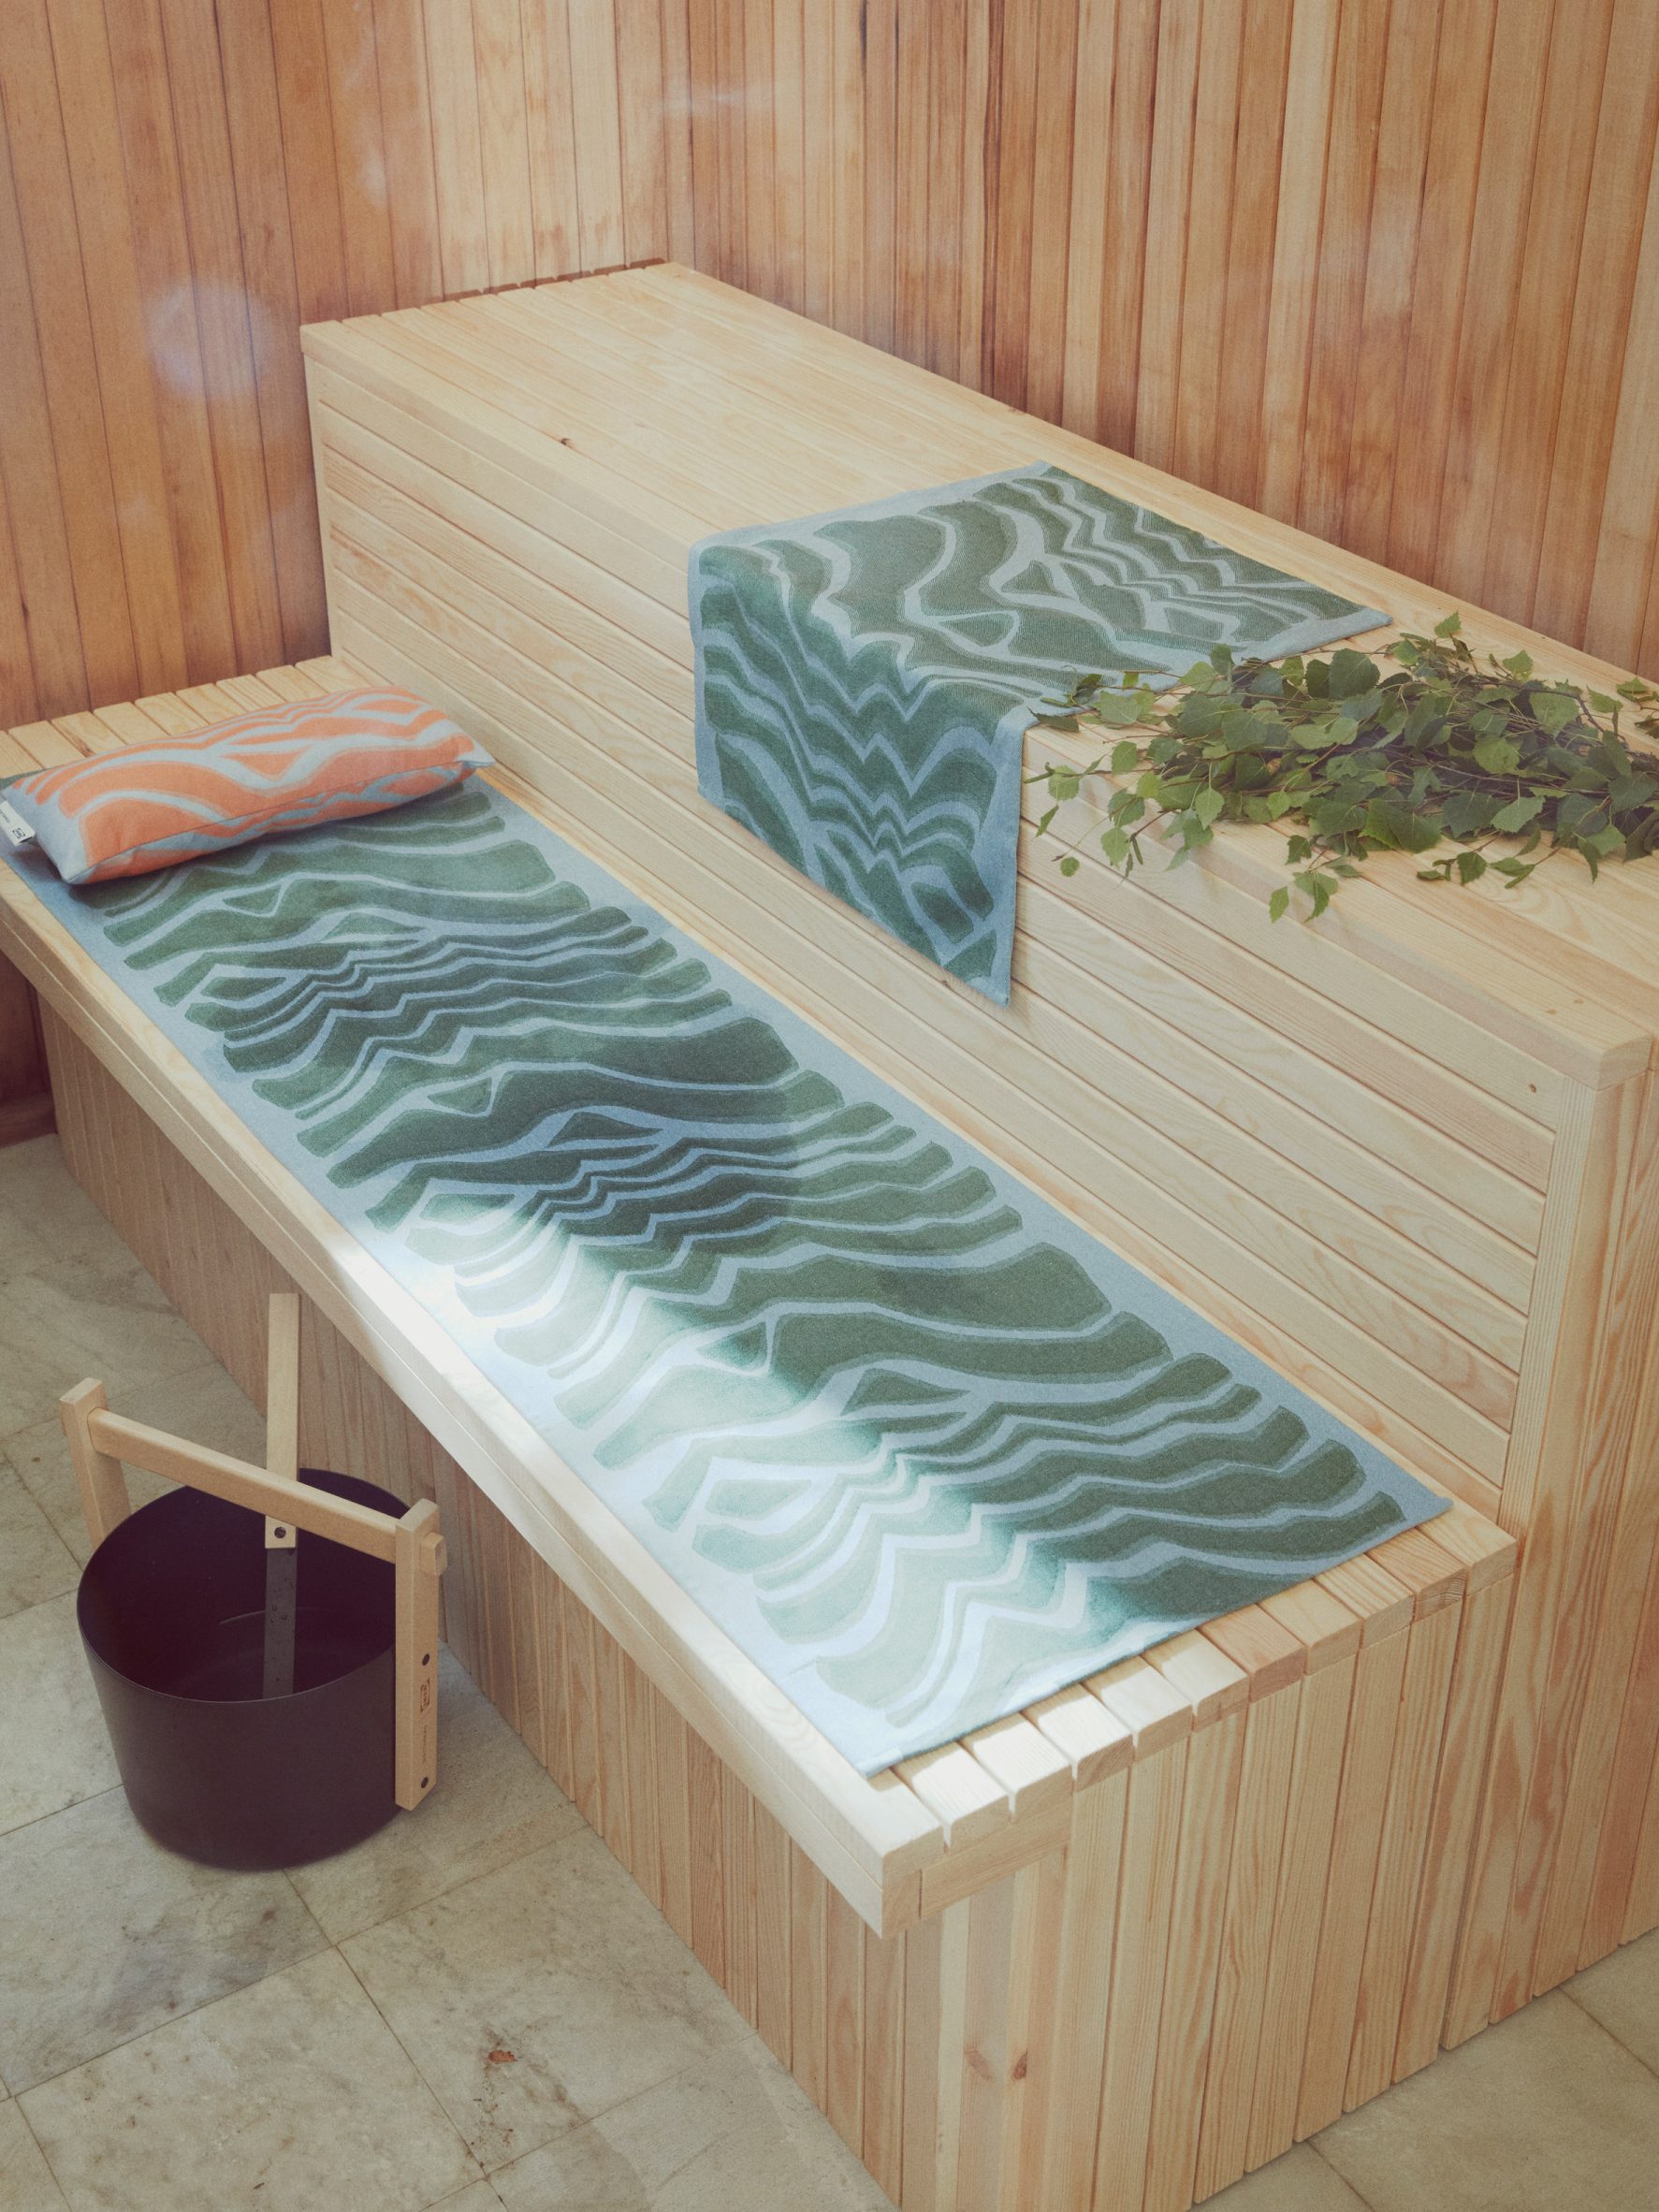 Wooden sauna seat with blue and green patterned towels